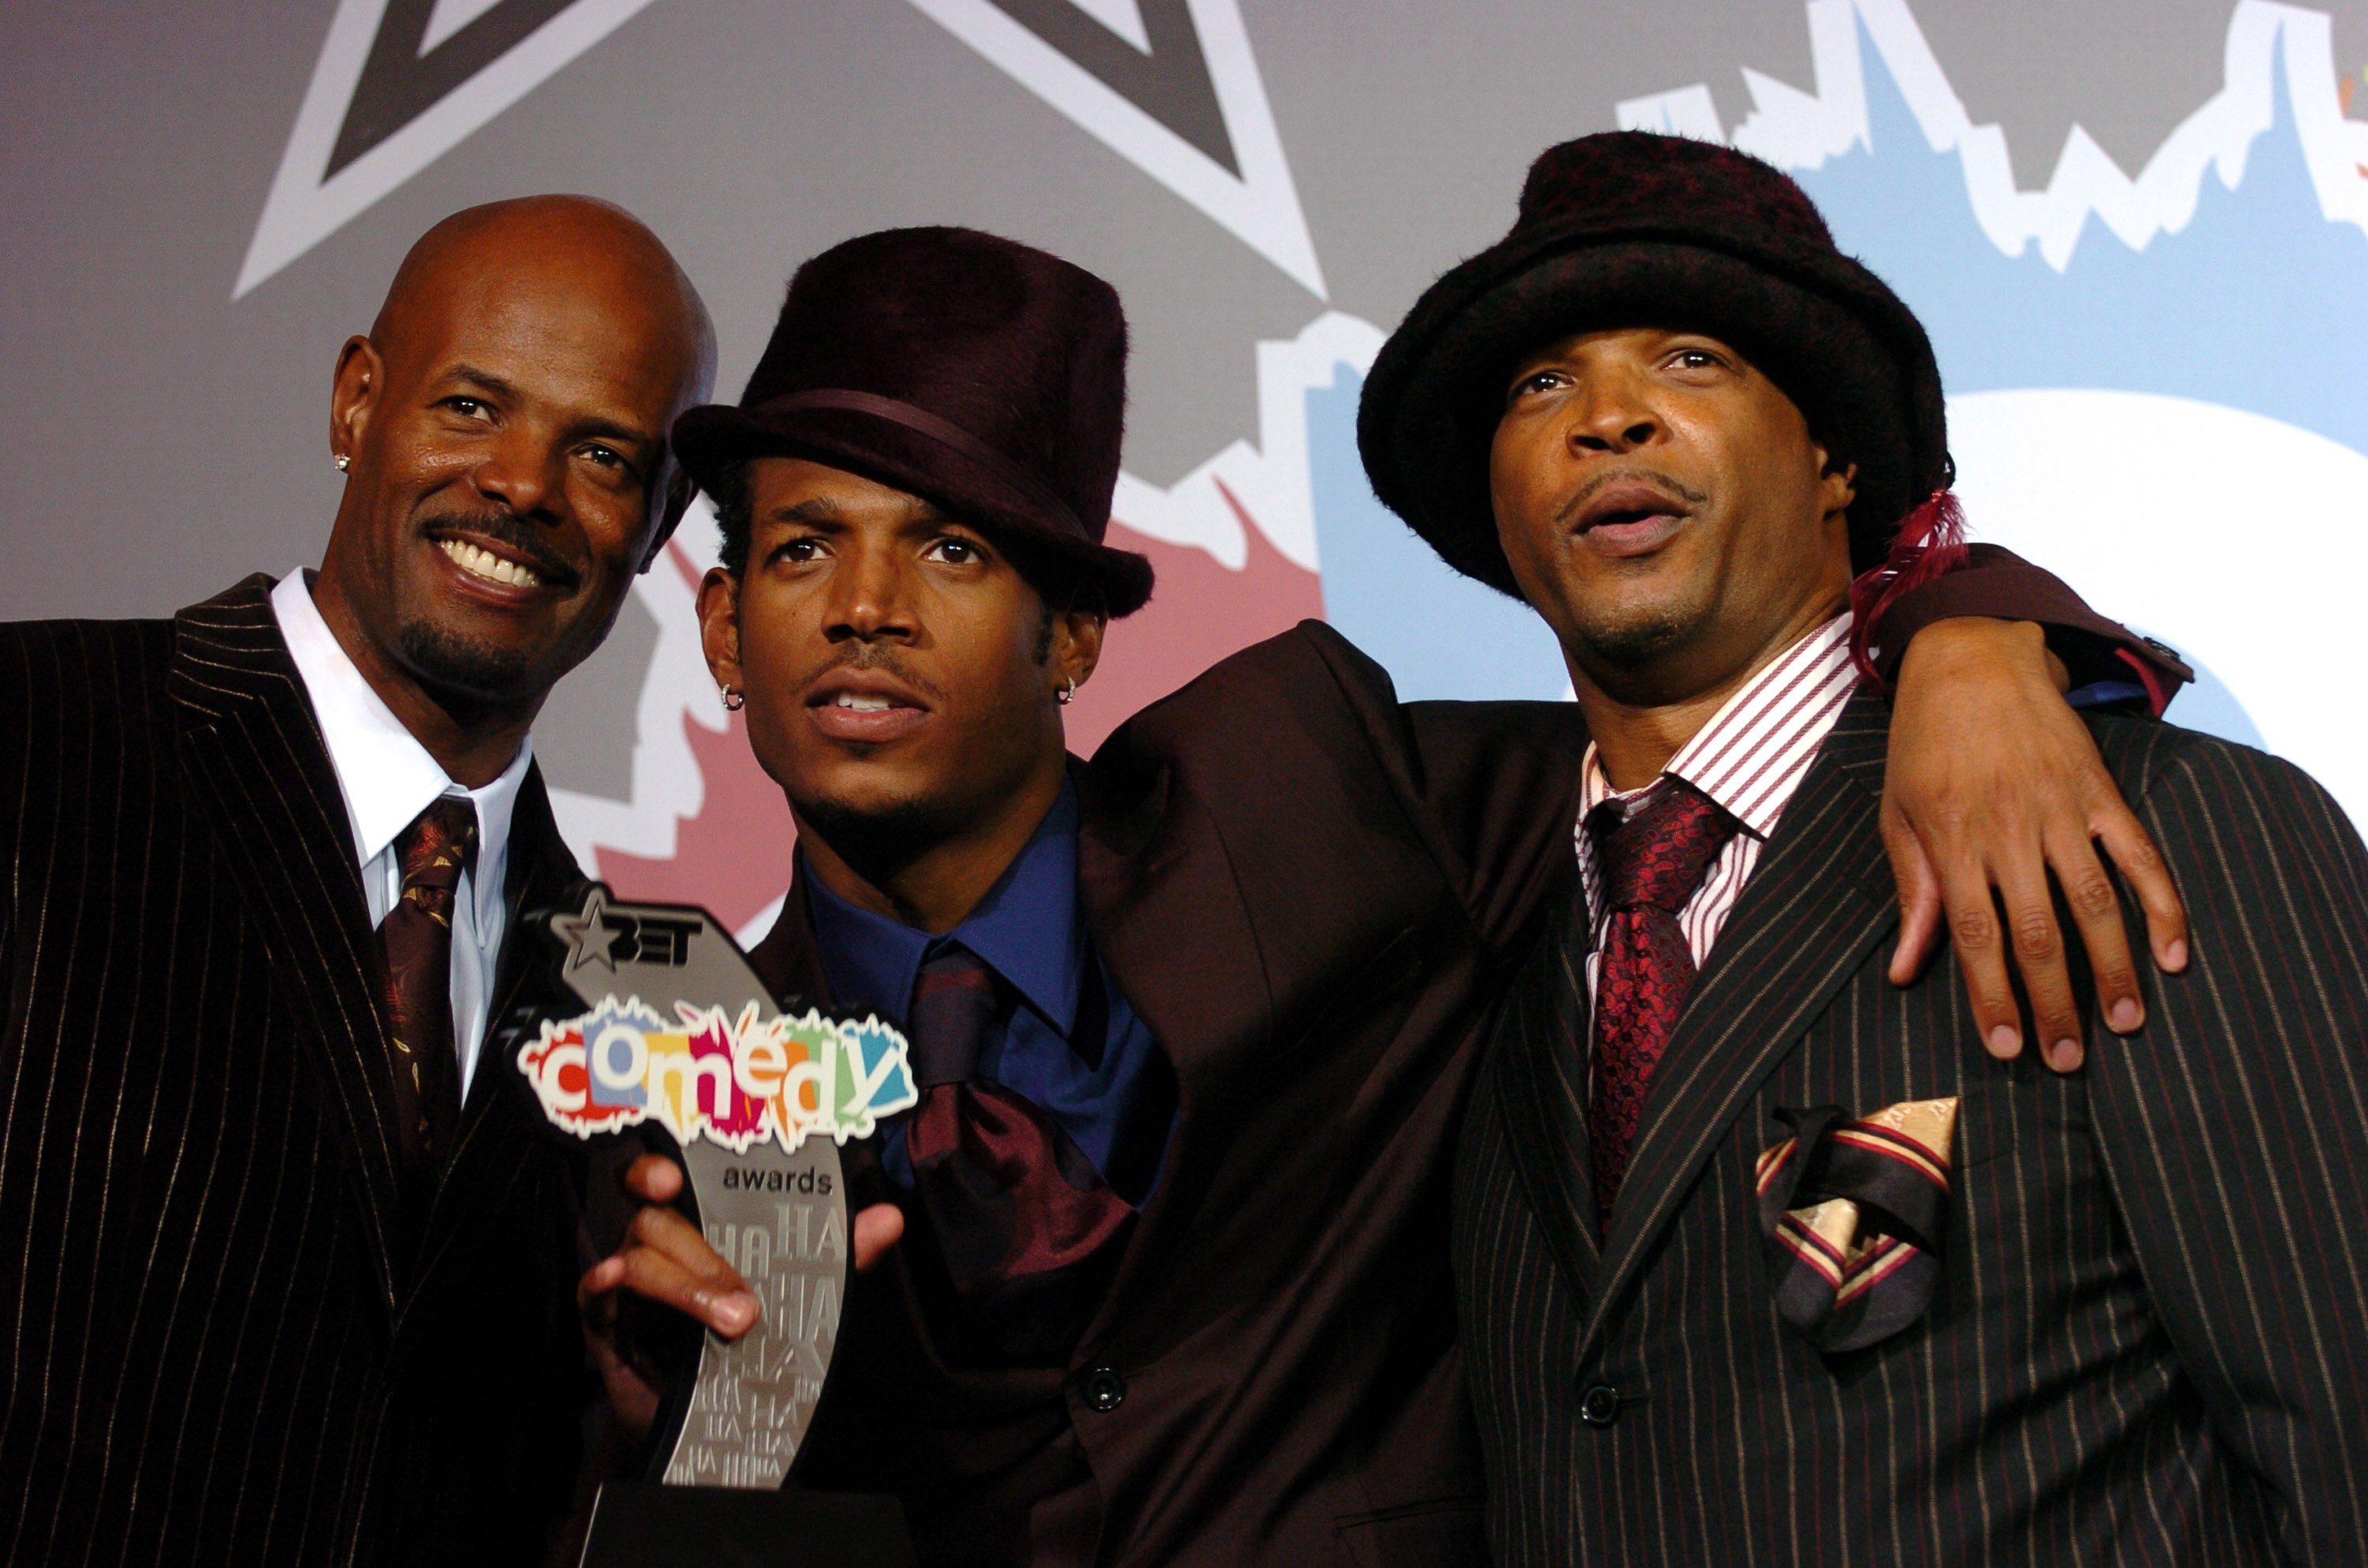 Keenen Ivory Wayans, Marlon Wayans, and Damon Wayans at the BET Award in 2004. | Source: Getty Images